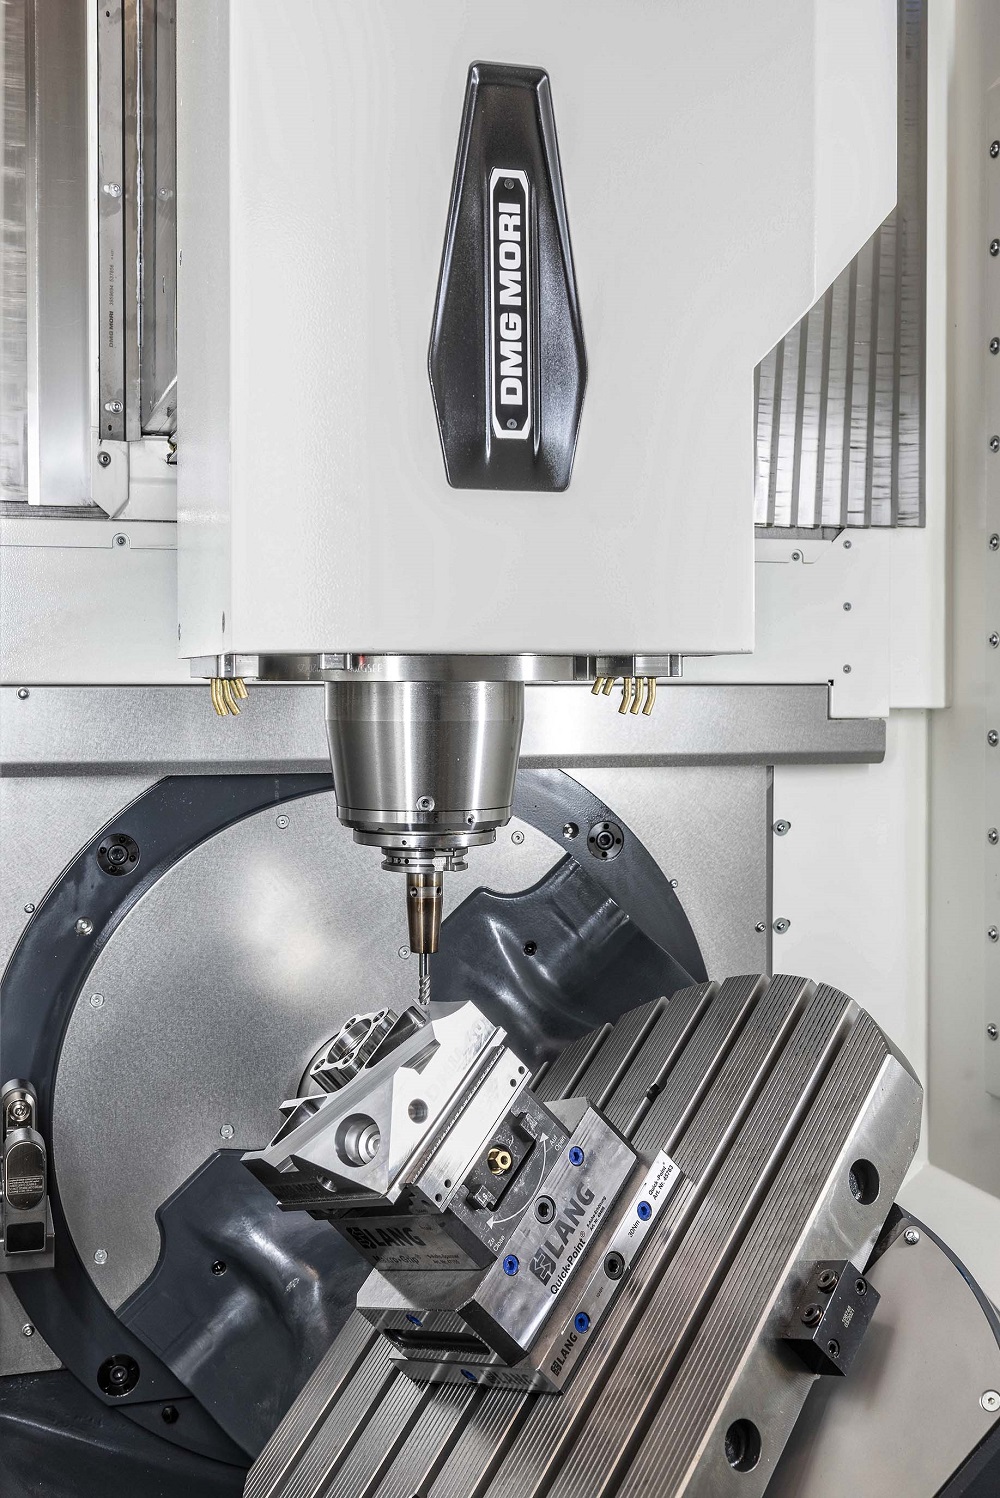 New entry-level five-axis machining centre